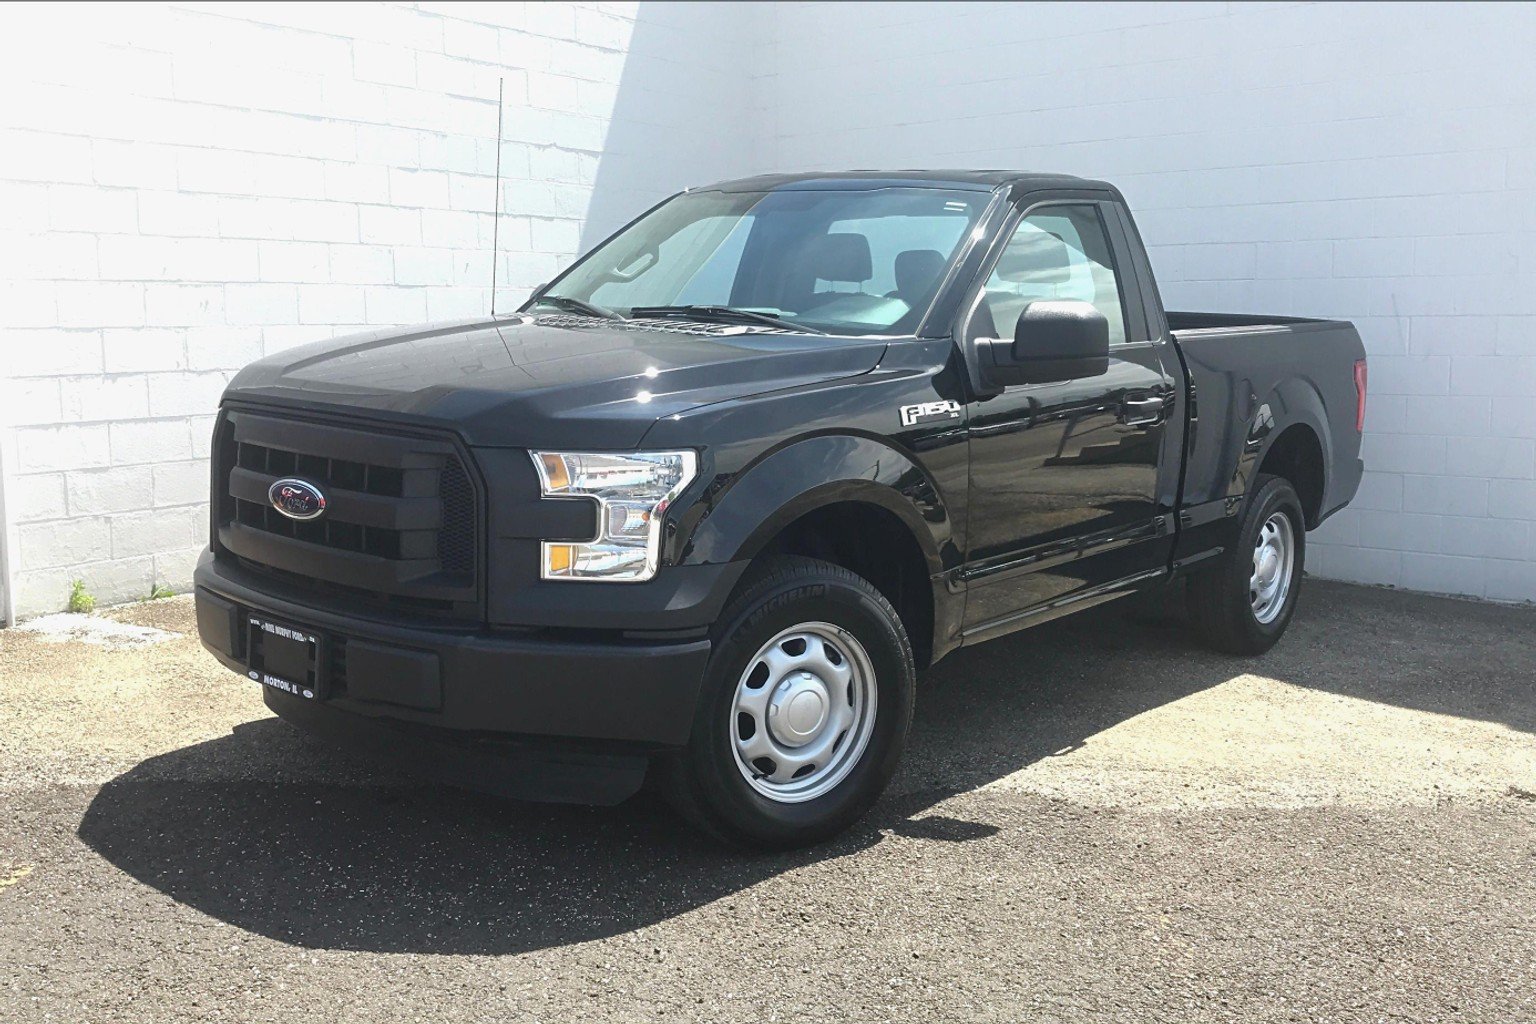 Pre-Owned 2016 Ford F-150 XL Regular Cab Pickup in Morton #C98295